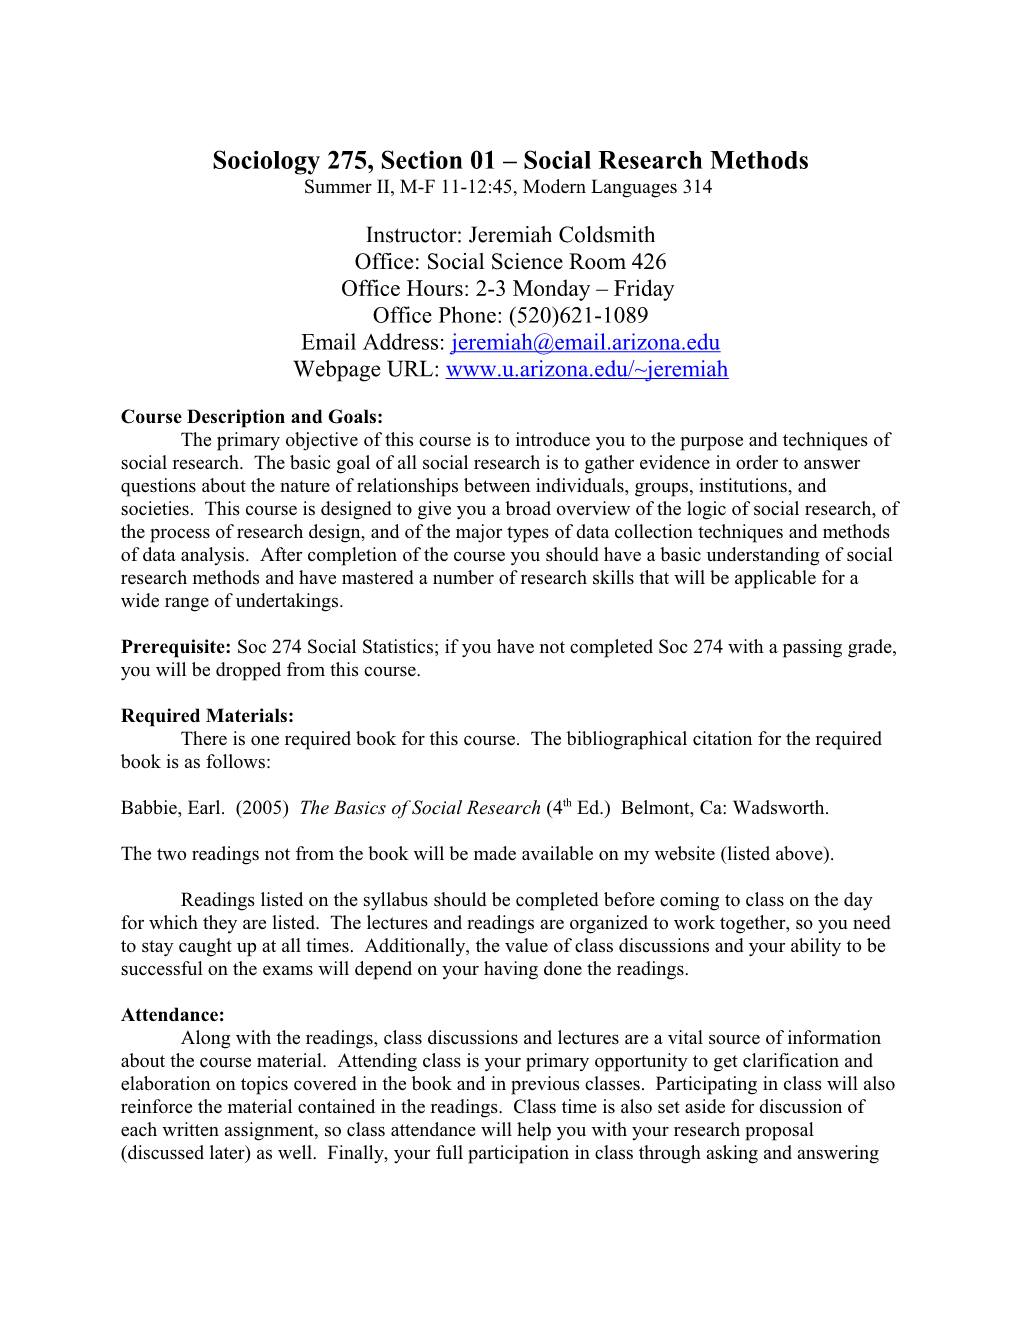 Sociology 275 Section 02: Social Research Methods